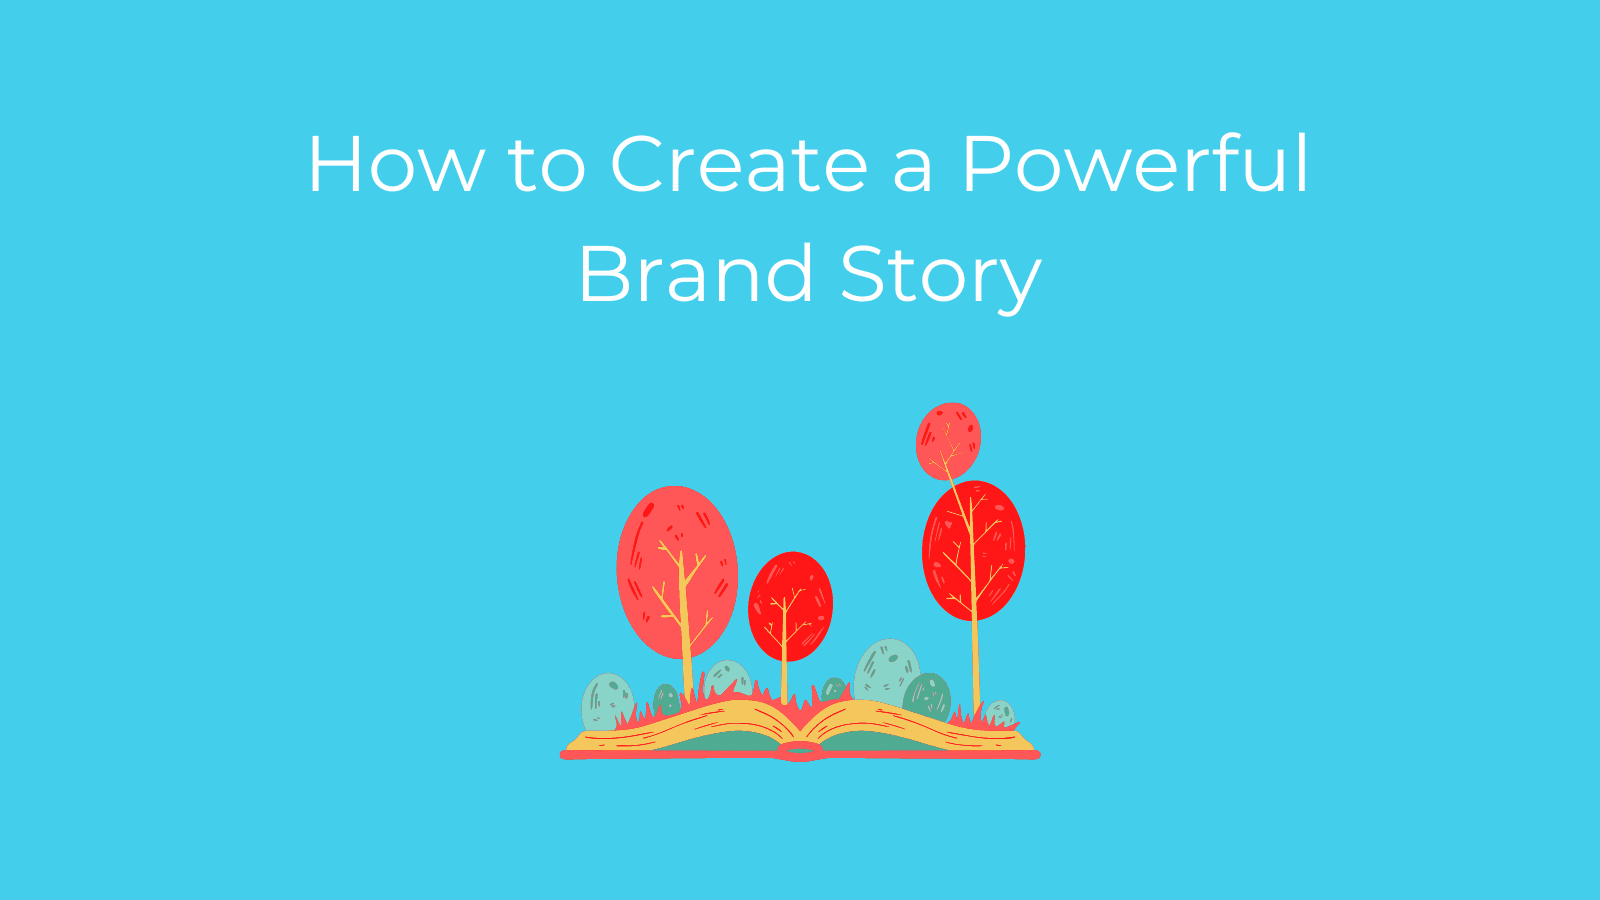 How to Create a Powerful Brand Story